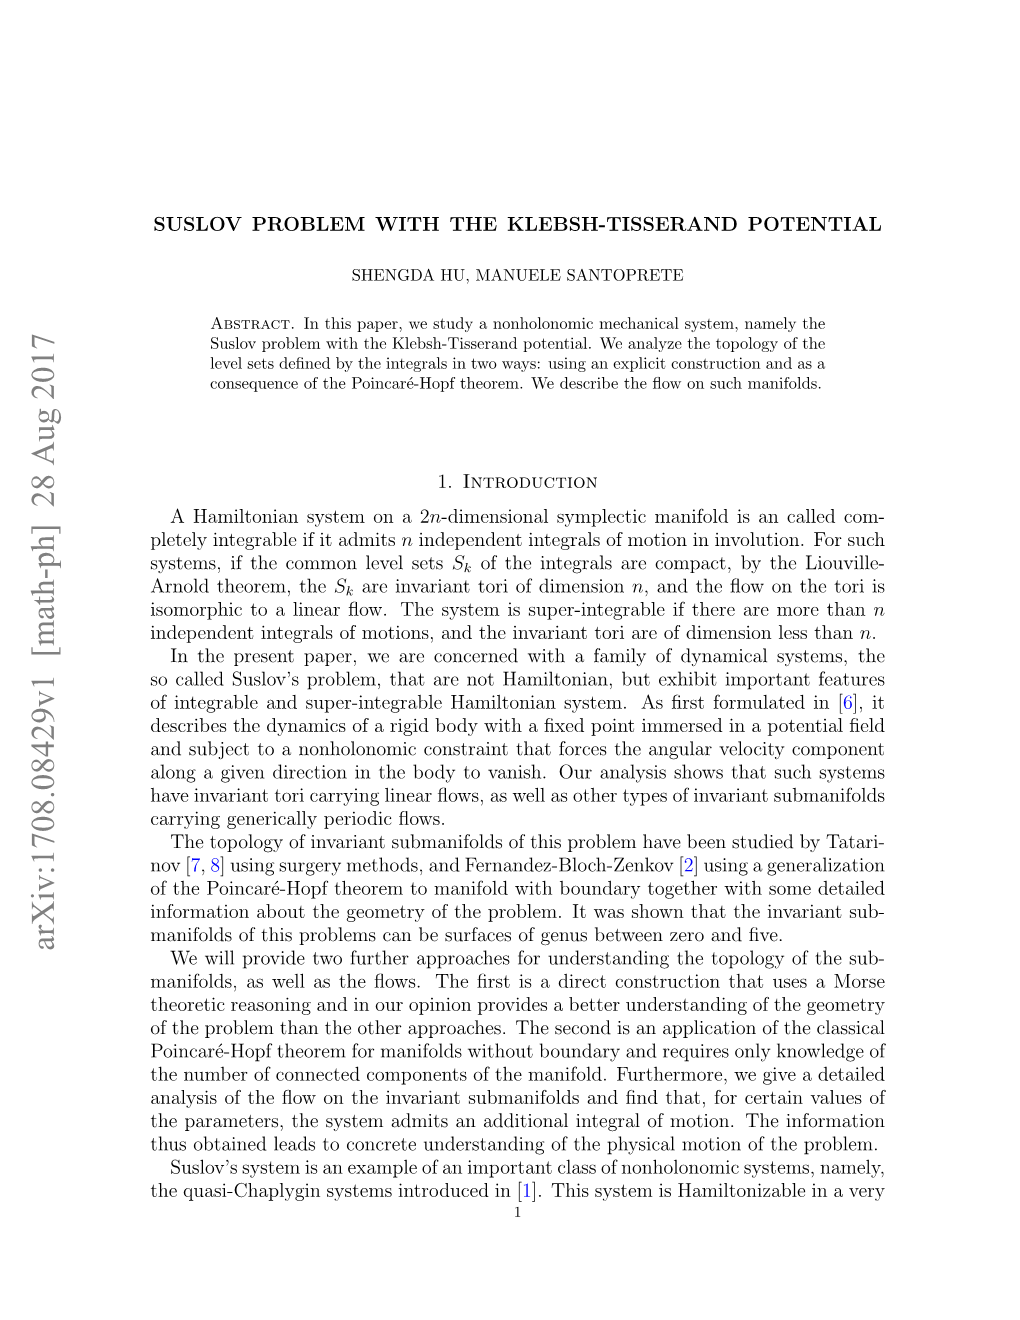 Suslov Problem with the Klebsh-Tisserand Potential